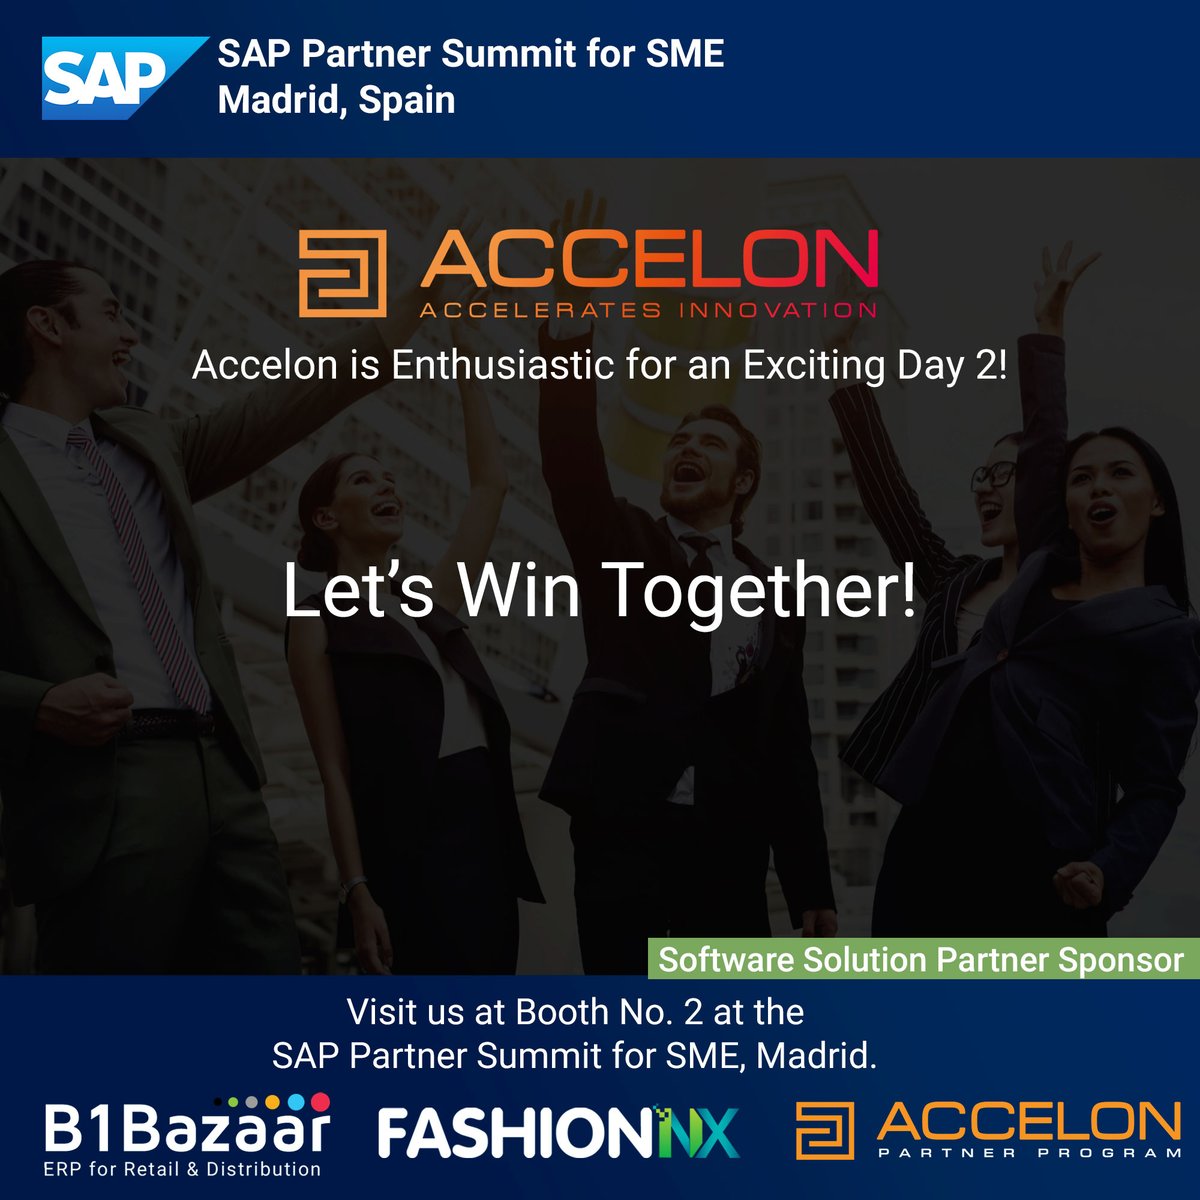 After an amazing Day 1 filled with interactions and discussions with other SAP partners, we are ready for Day 2. Join Accelon at Booth No 2 at the #SAPPartnerSummit4SME in Madrid

Let’s Win Together!

#SAPPartnerSummit4SME #SAP #PartnerSuccess #SAPCommunity #SAPBusinessOne